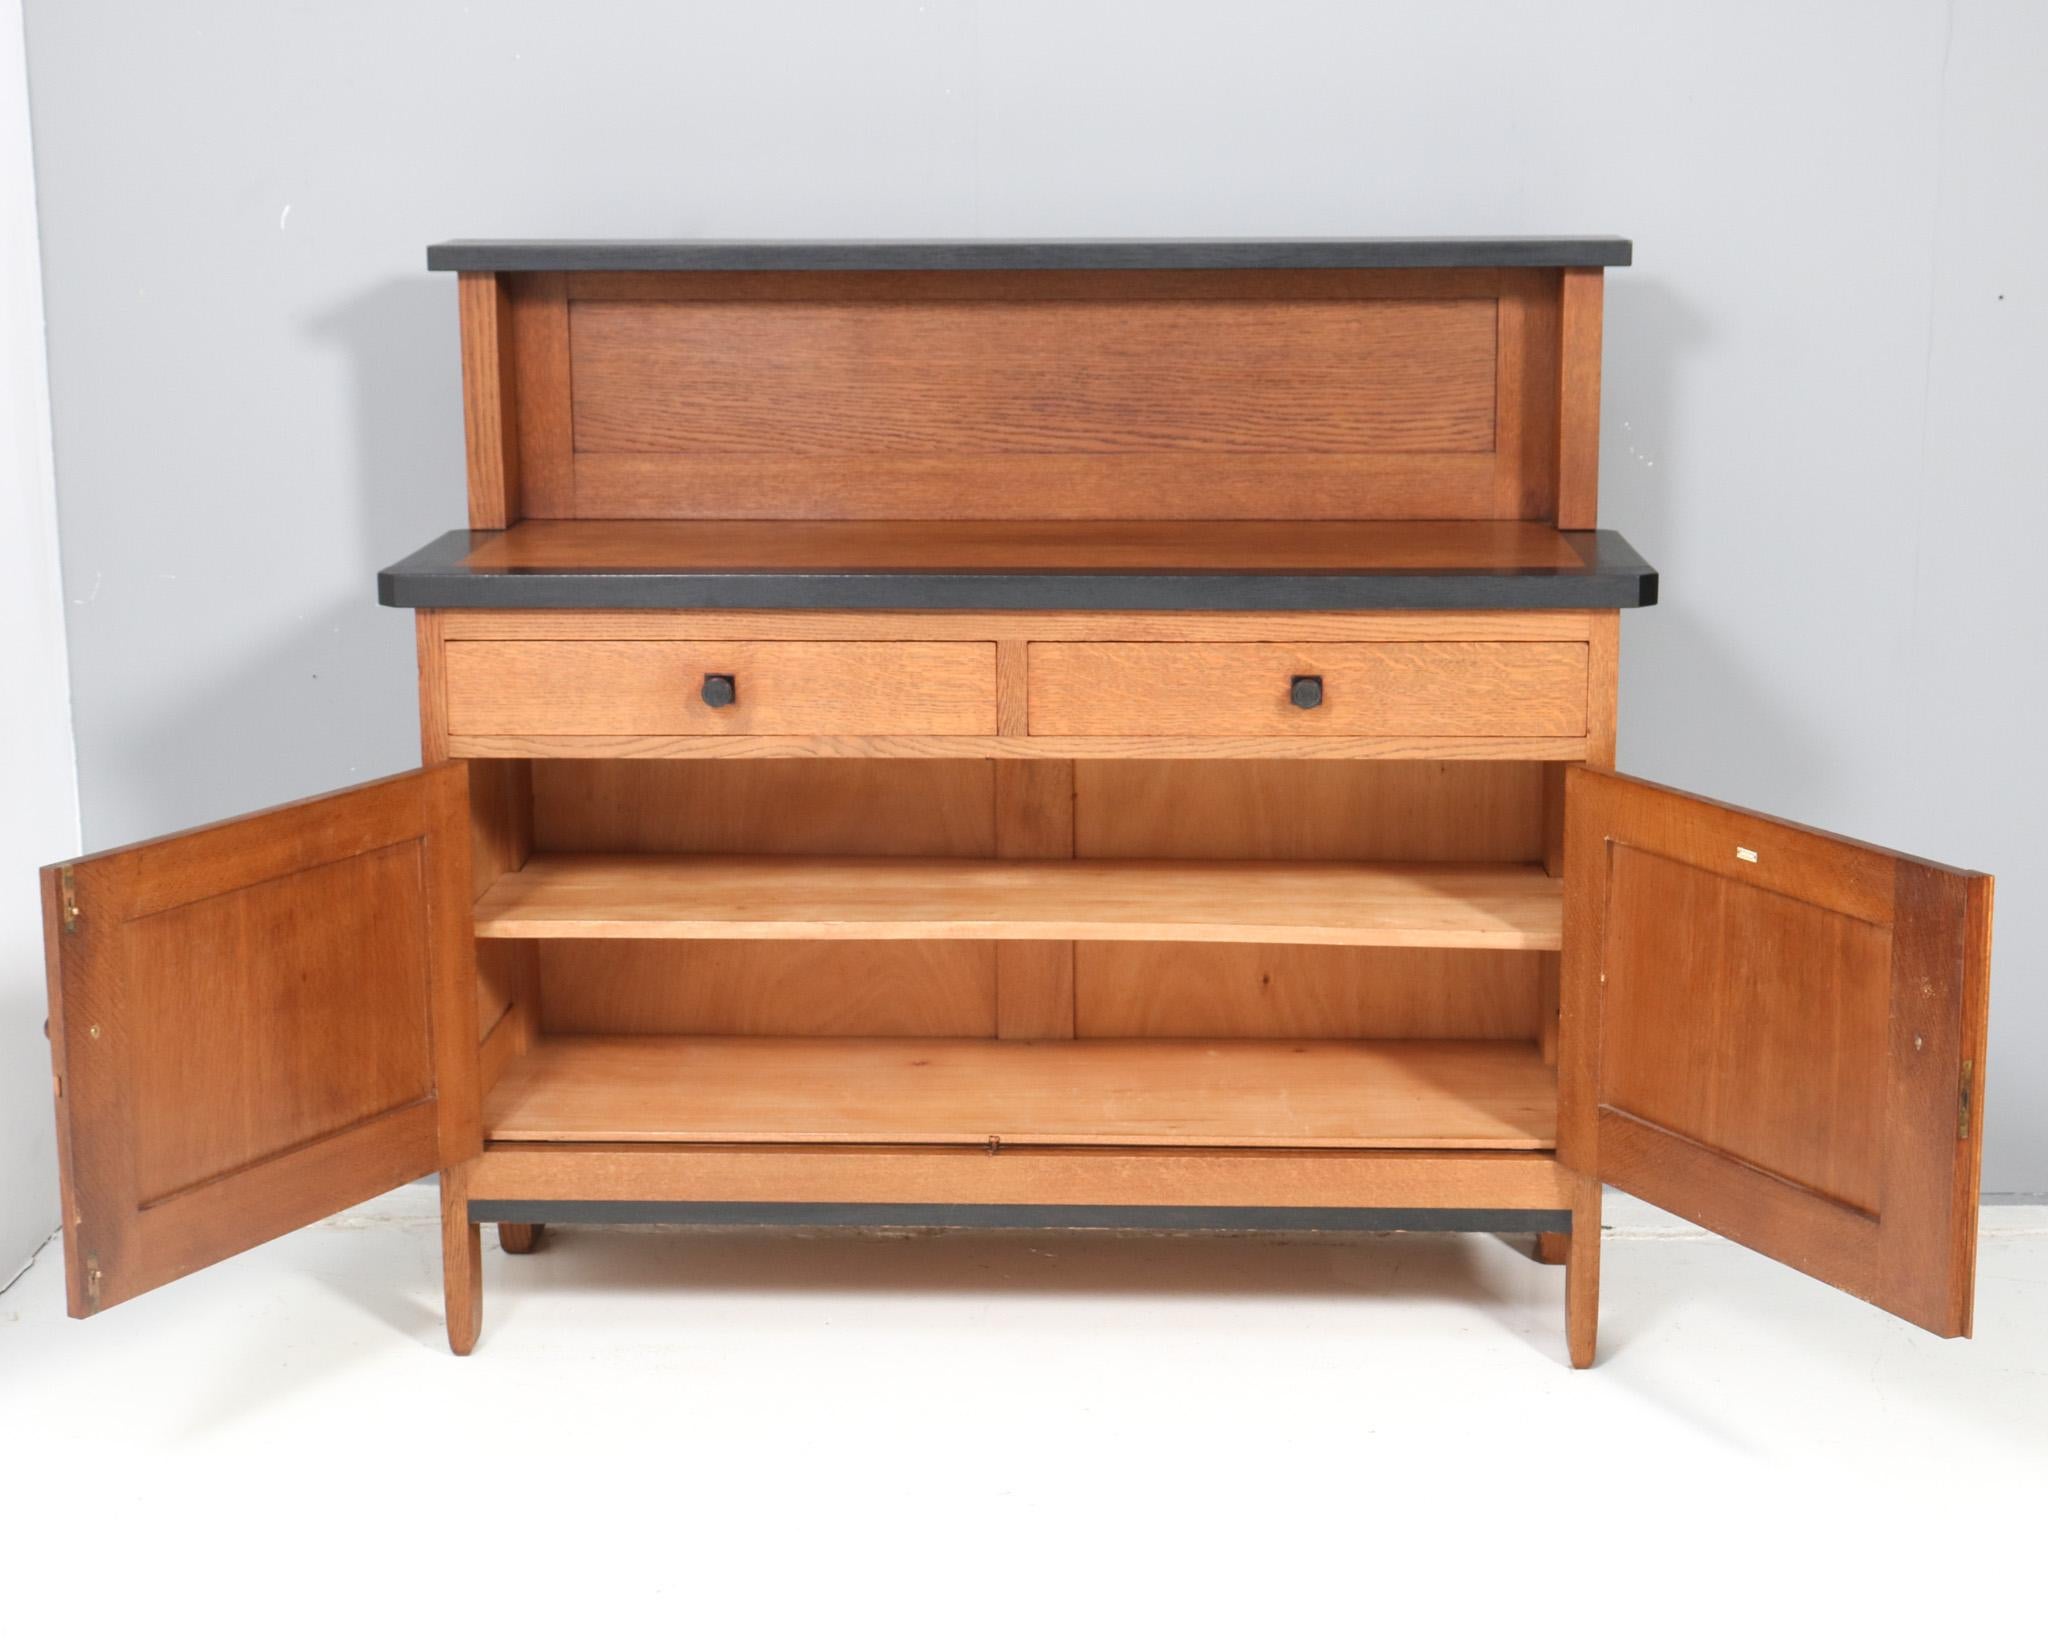 Early 20th Century  Art Deco Modernist Credenza or Sideboard by H. Fels for L.O.V. Oosterbeek For Sale